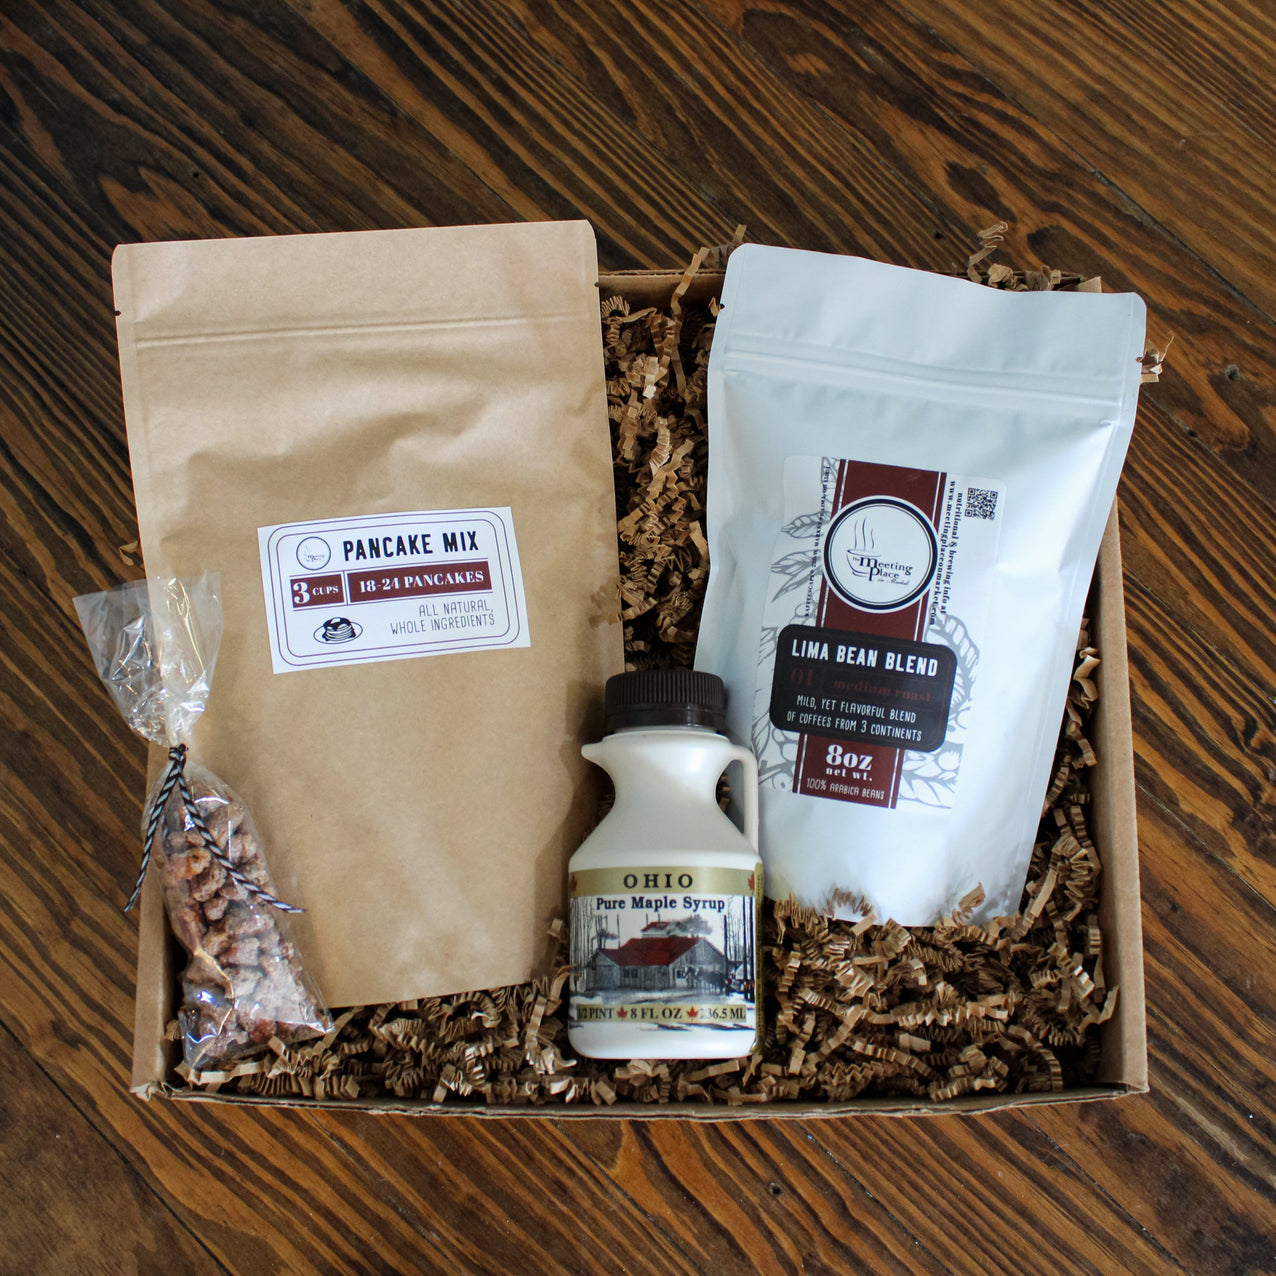 Breakfast in Bed Gift Box with Pancakes, Maple Syrup, and Coffee Baked Goods Gift Boxes - The Meeting Place on Market